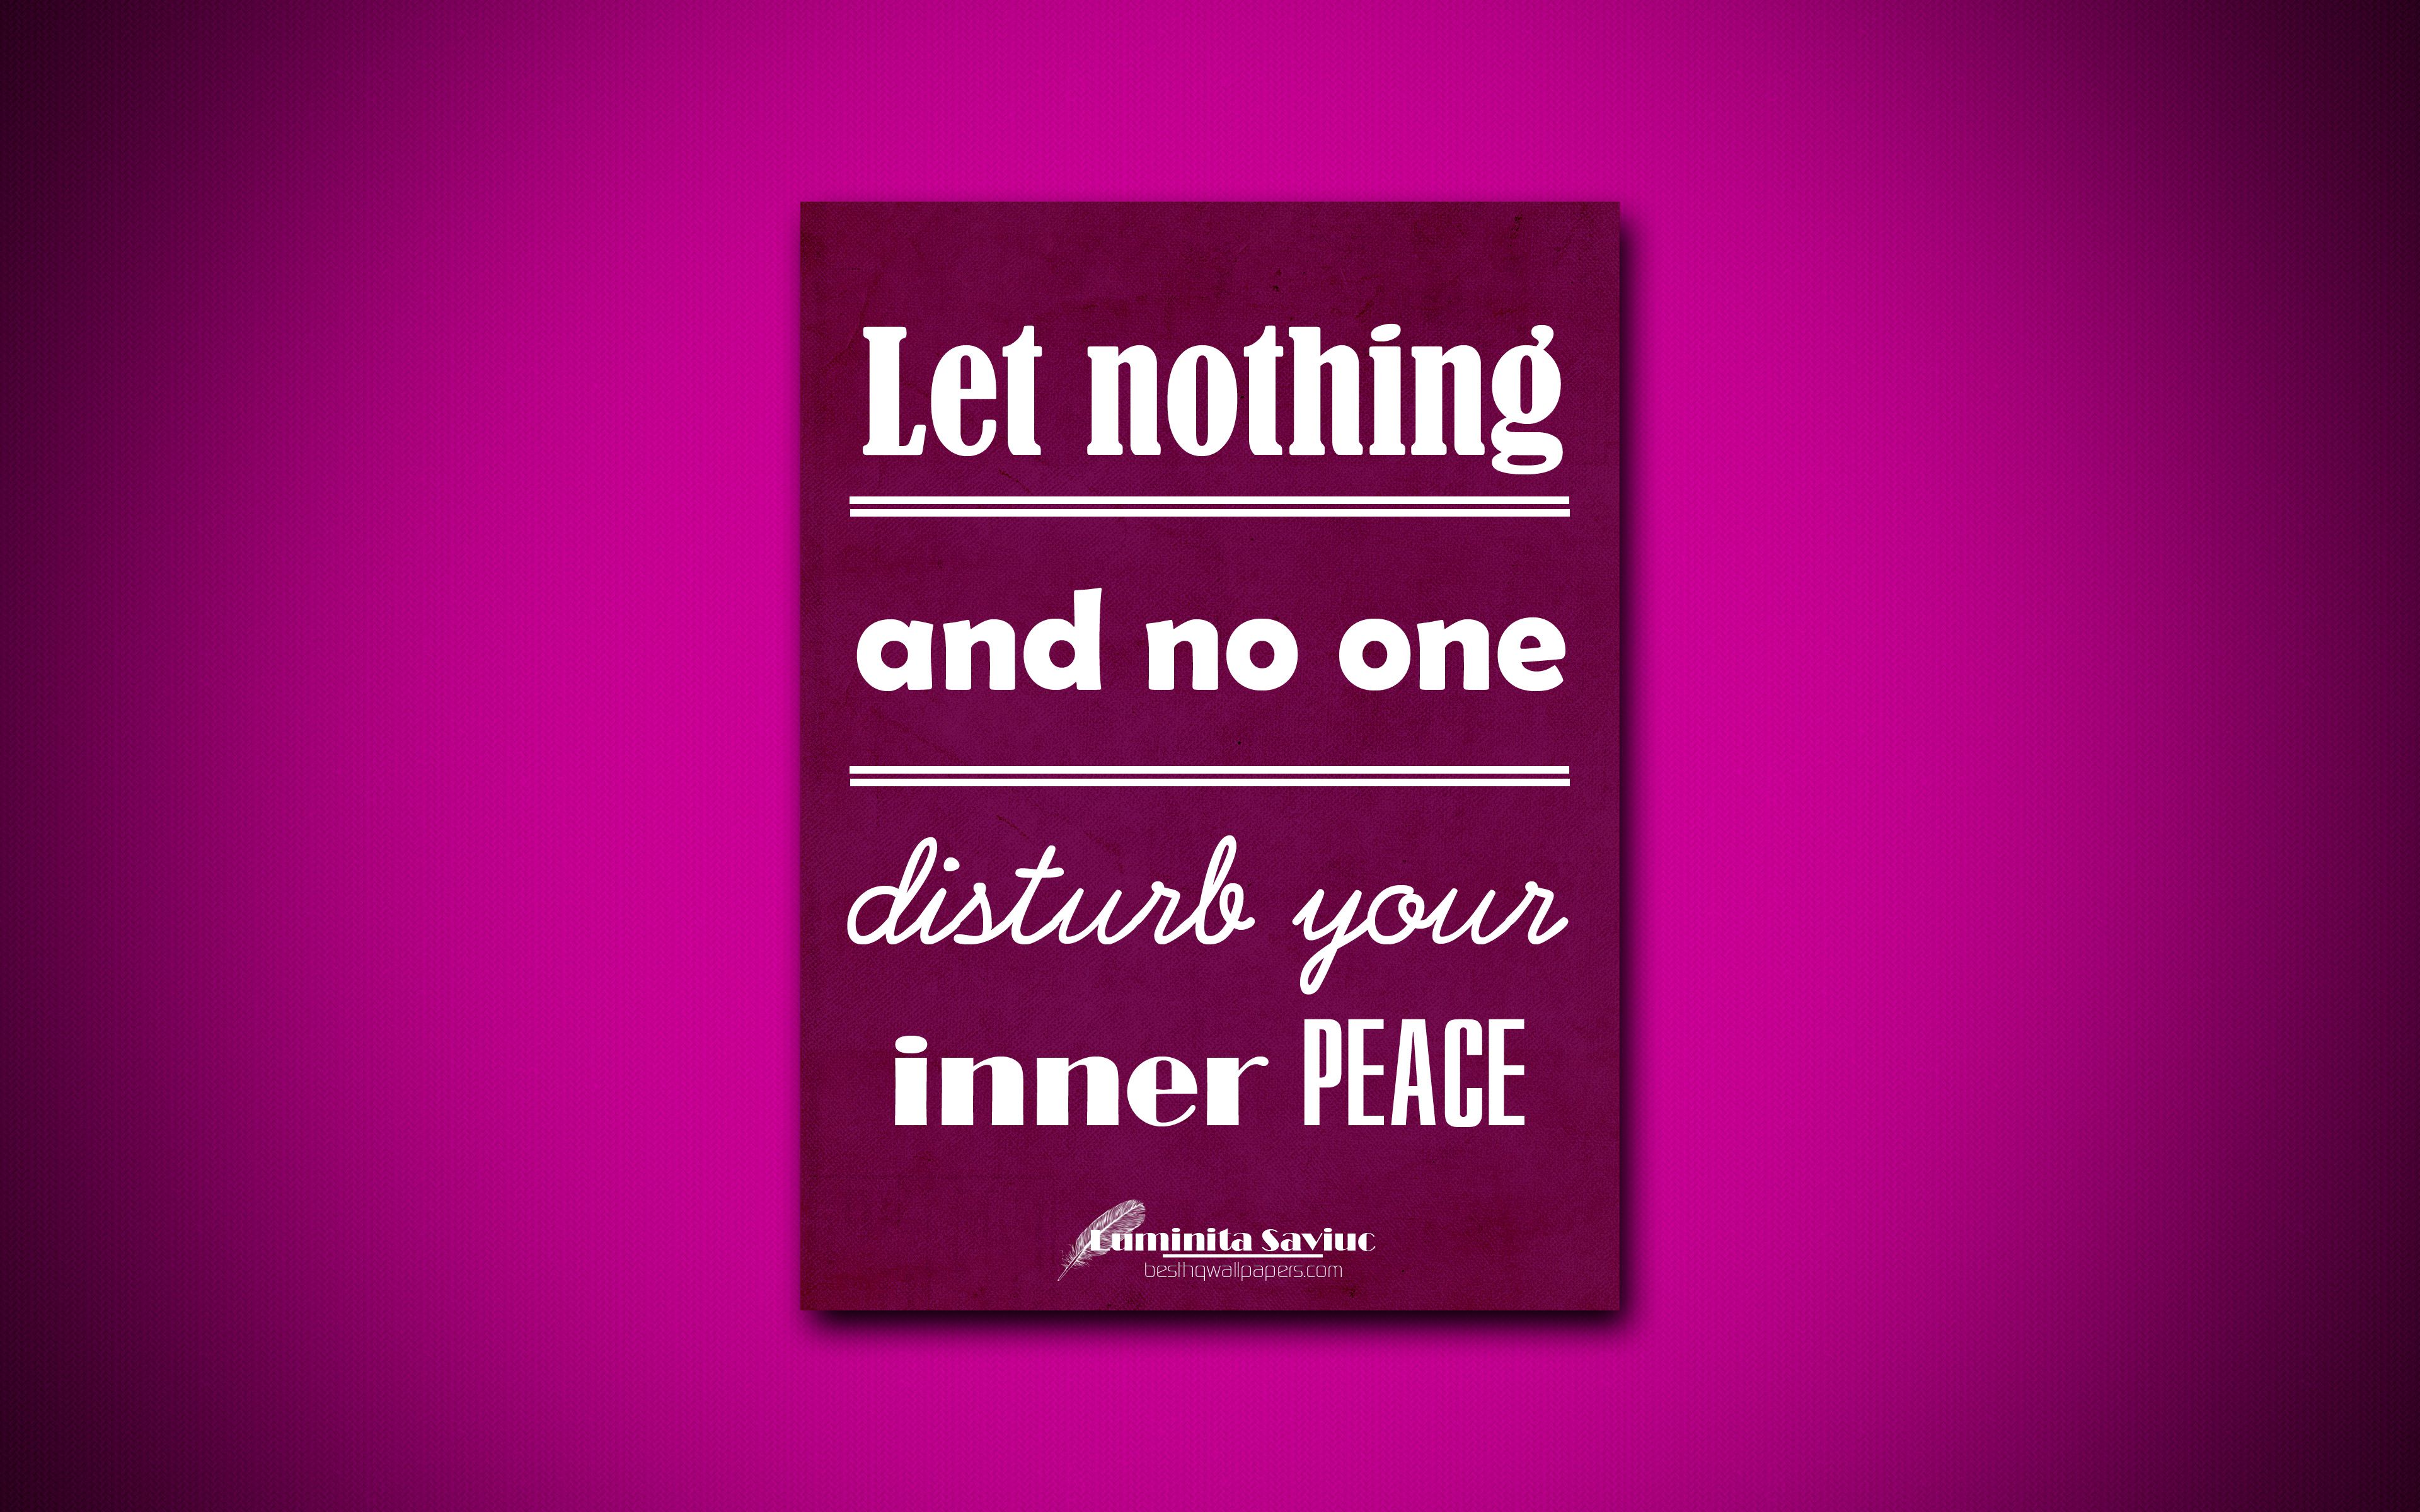 Download wallpaper 4k, Let nothing and no one disturb your inner peace, quotes about peace, Luminita Saviuc, purple paper, popular quotes, inspiration, Luminita Saviuc quotes for desktop with resolution 3840x2400. High Quality